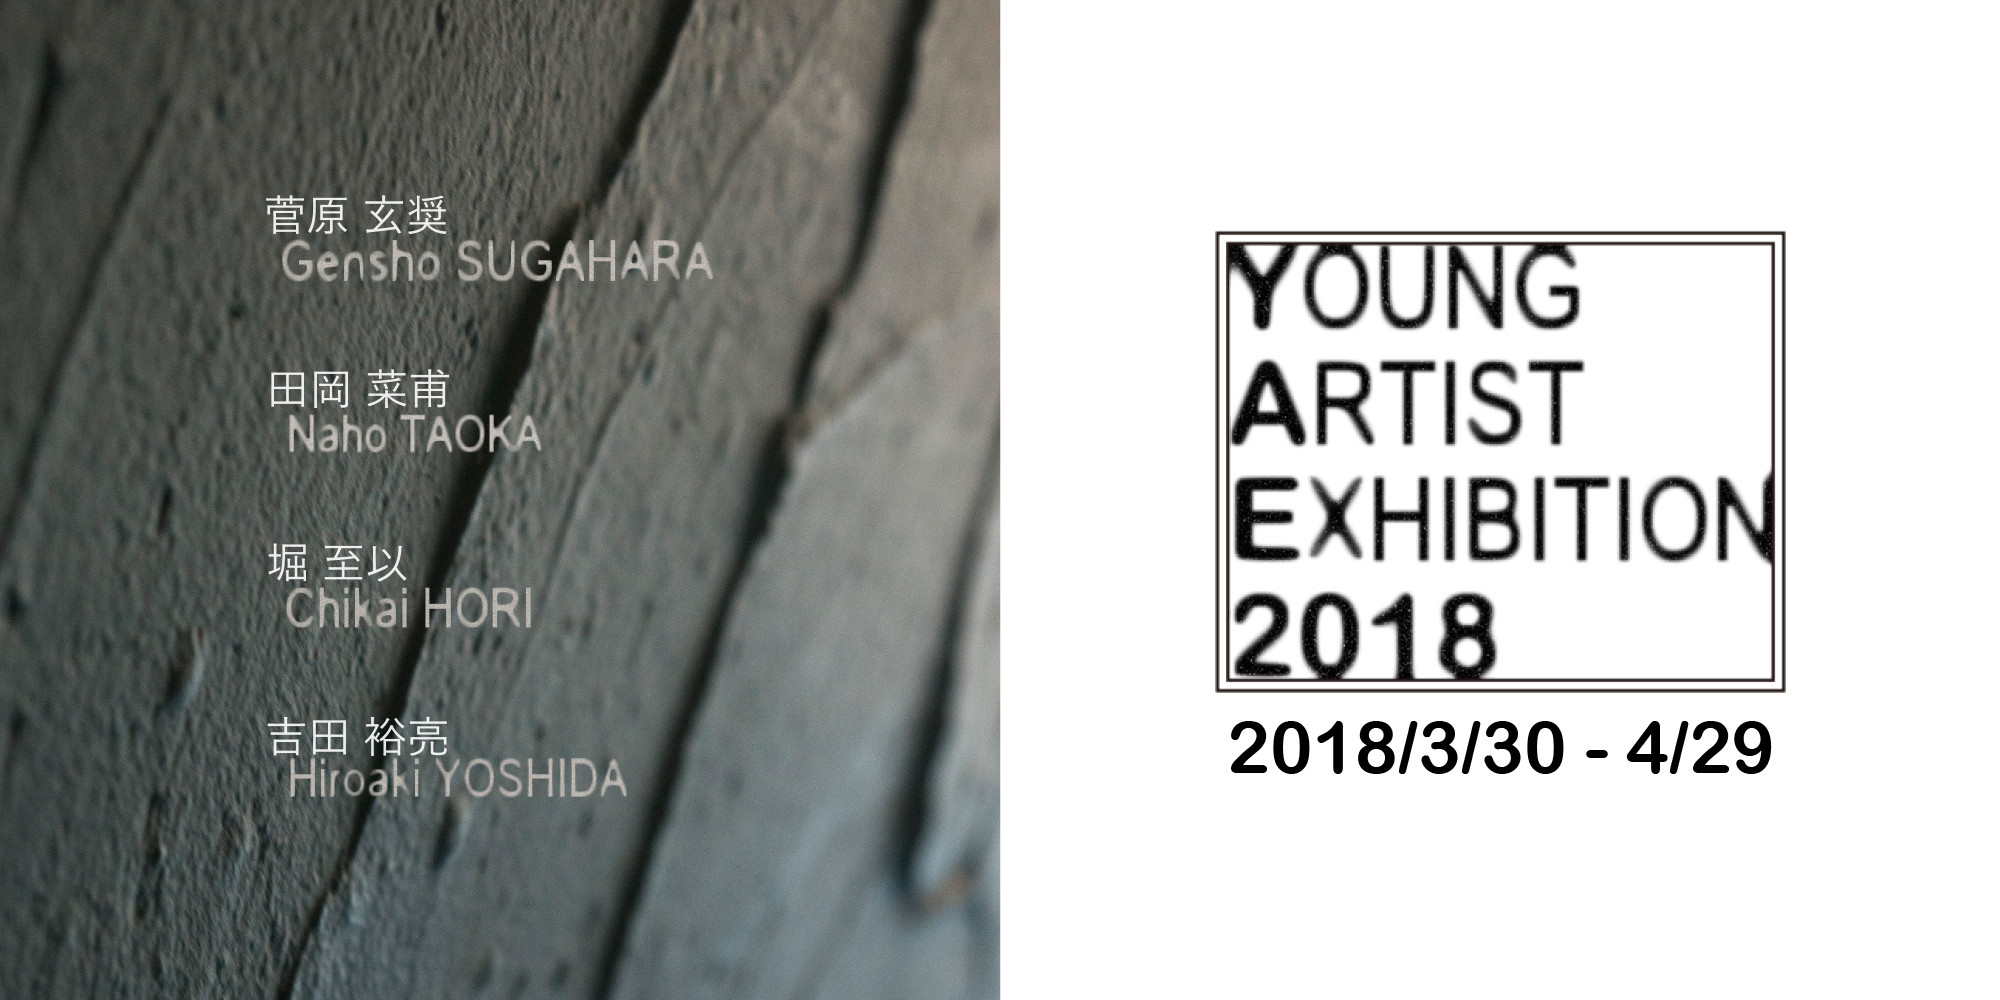 YOUNG ARTIST EXHIBITION 2018